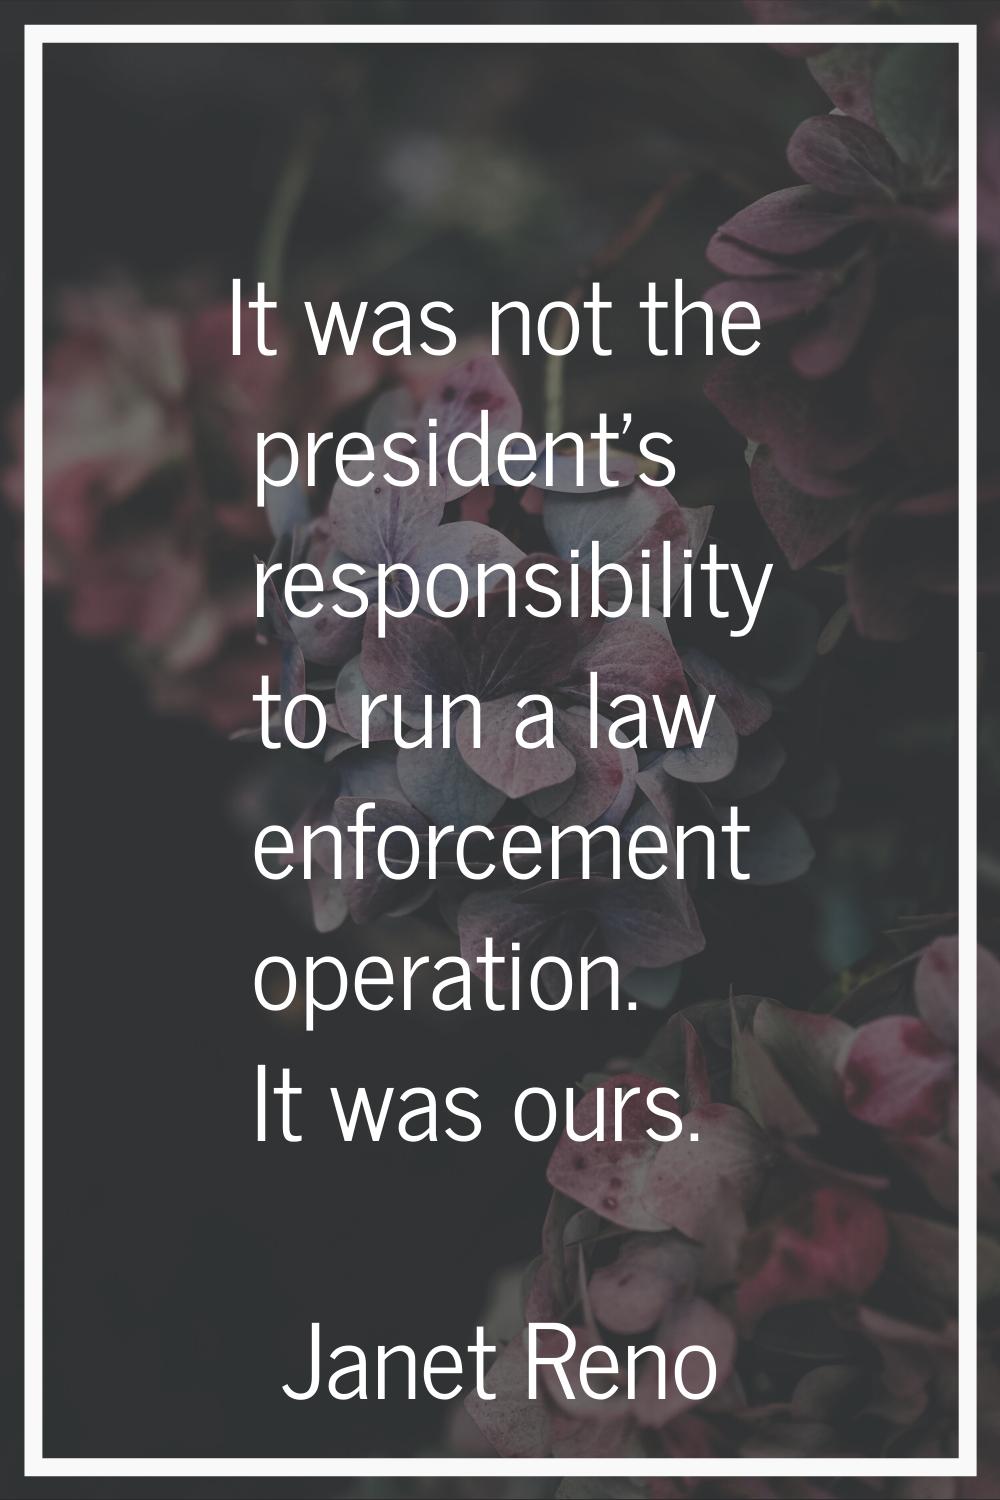 It was not the president's responsibility to run a law enforcement operation. It was ours.